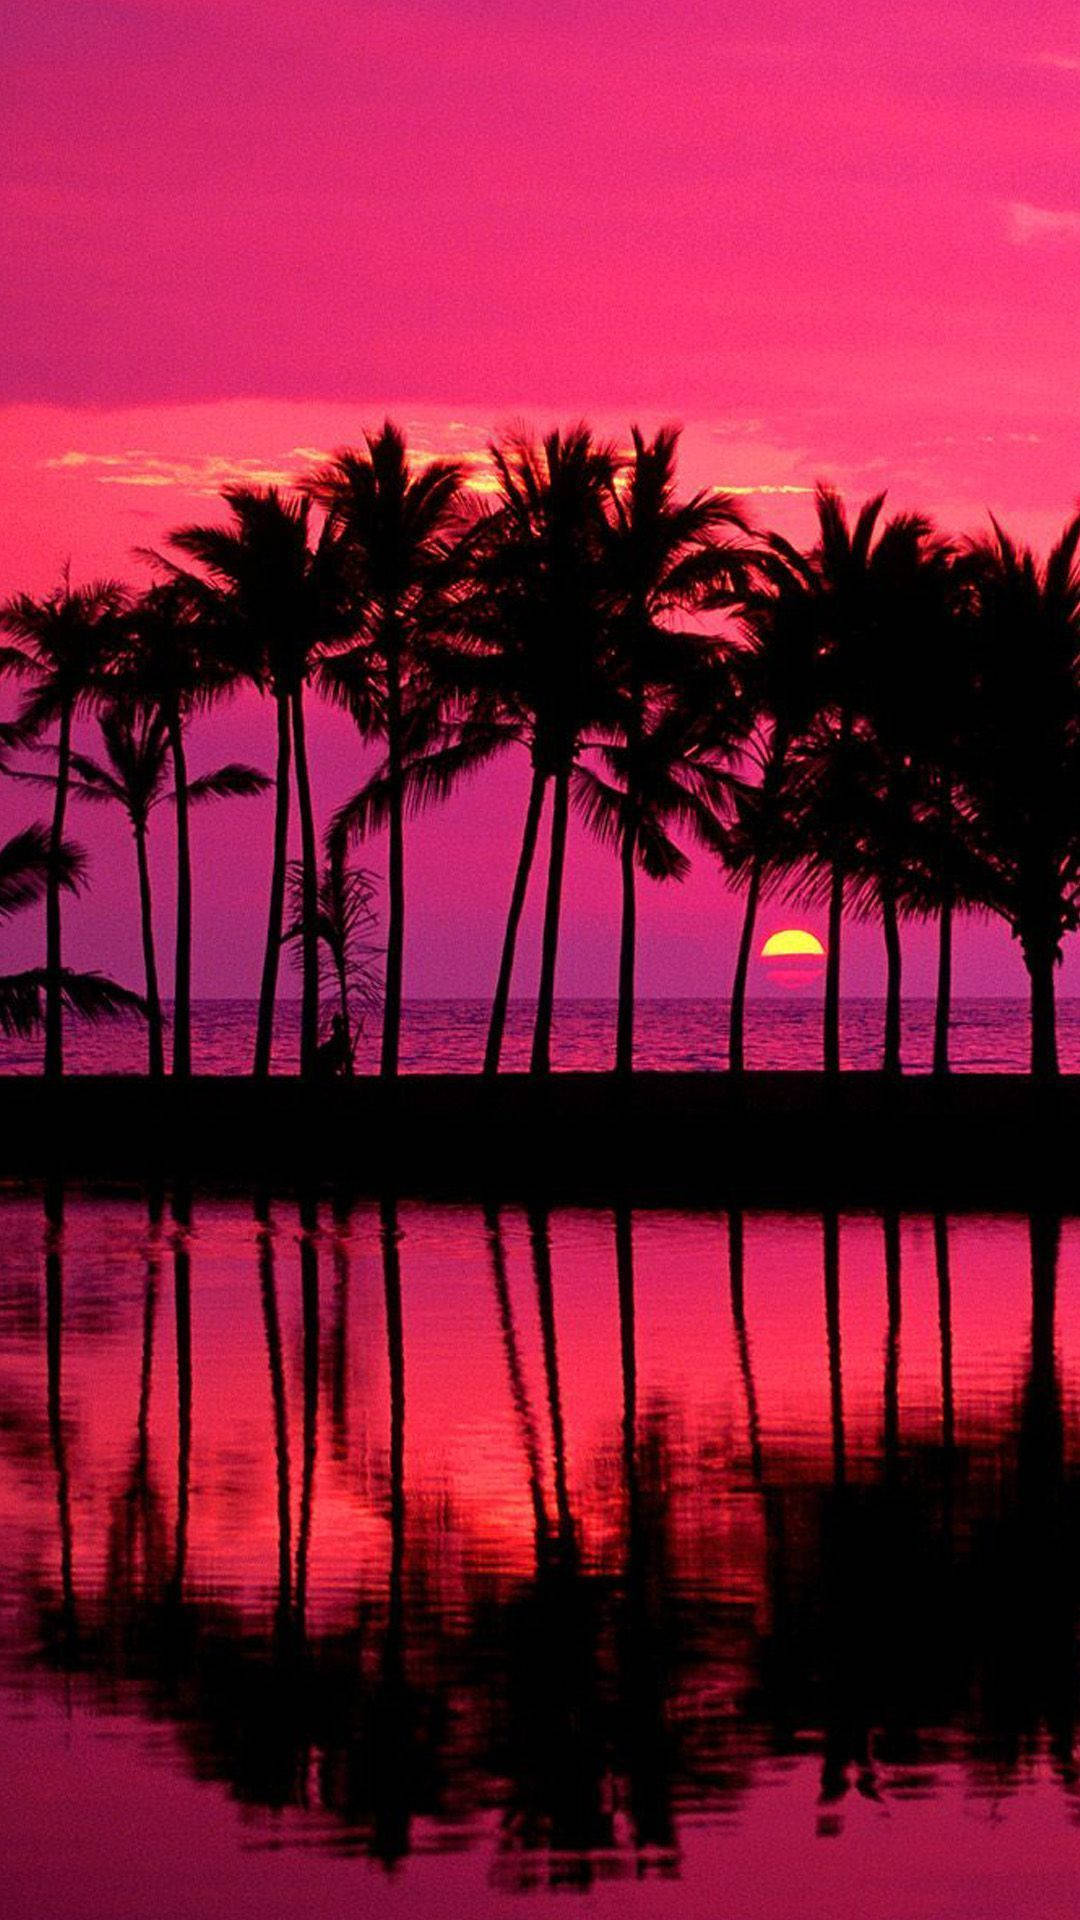 Enjoy a stunning pink sunset with your iPhone. Wallpaper